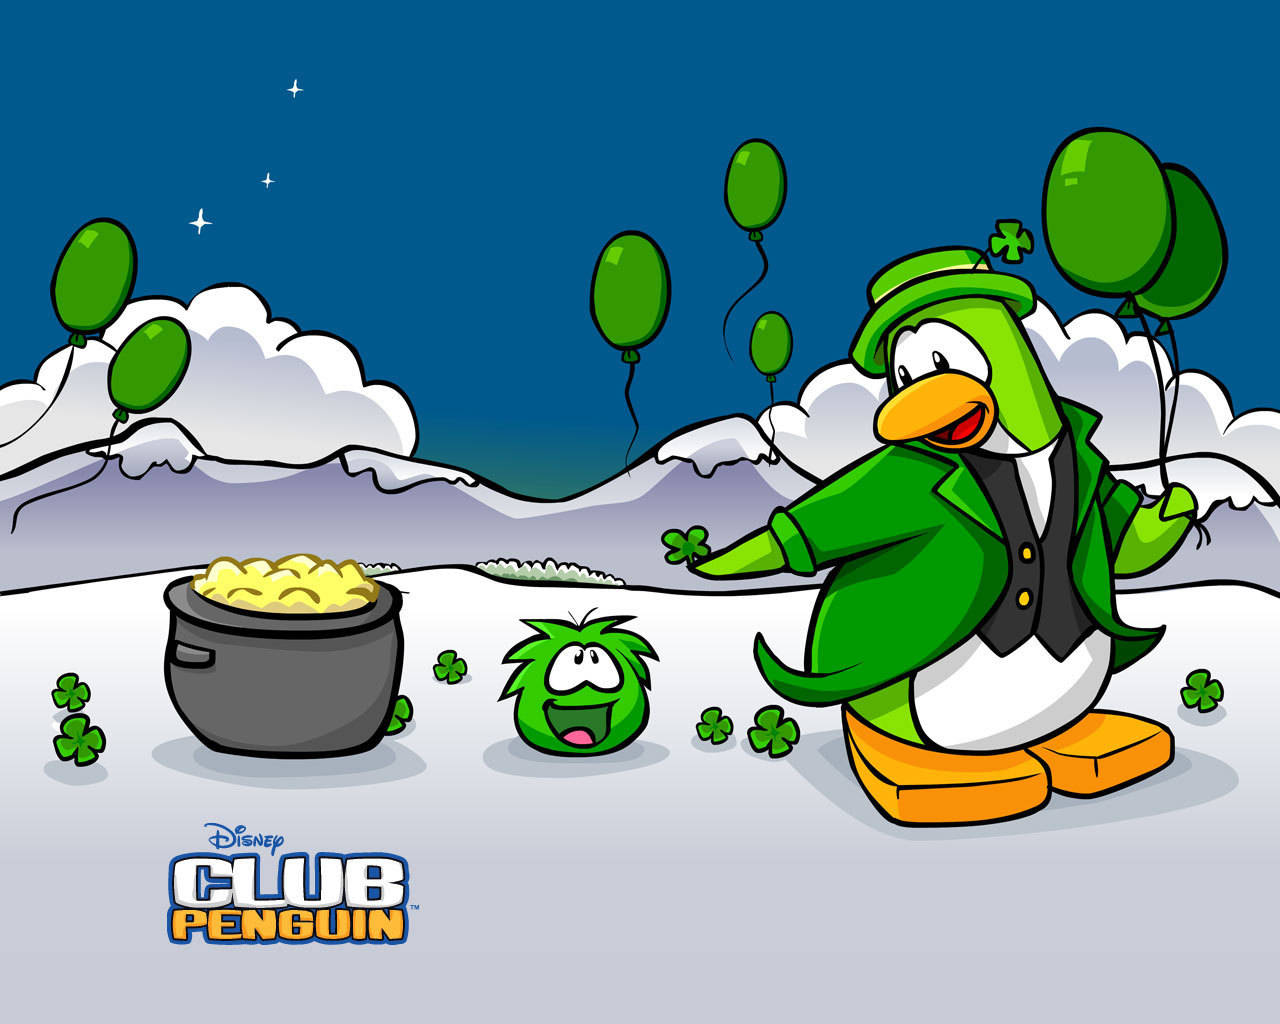 Club Penguin Poster With Green Balloons Background